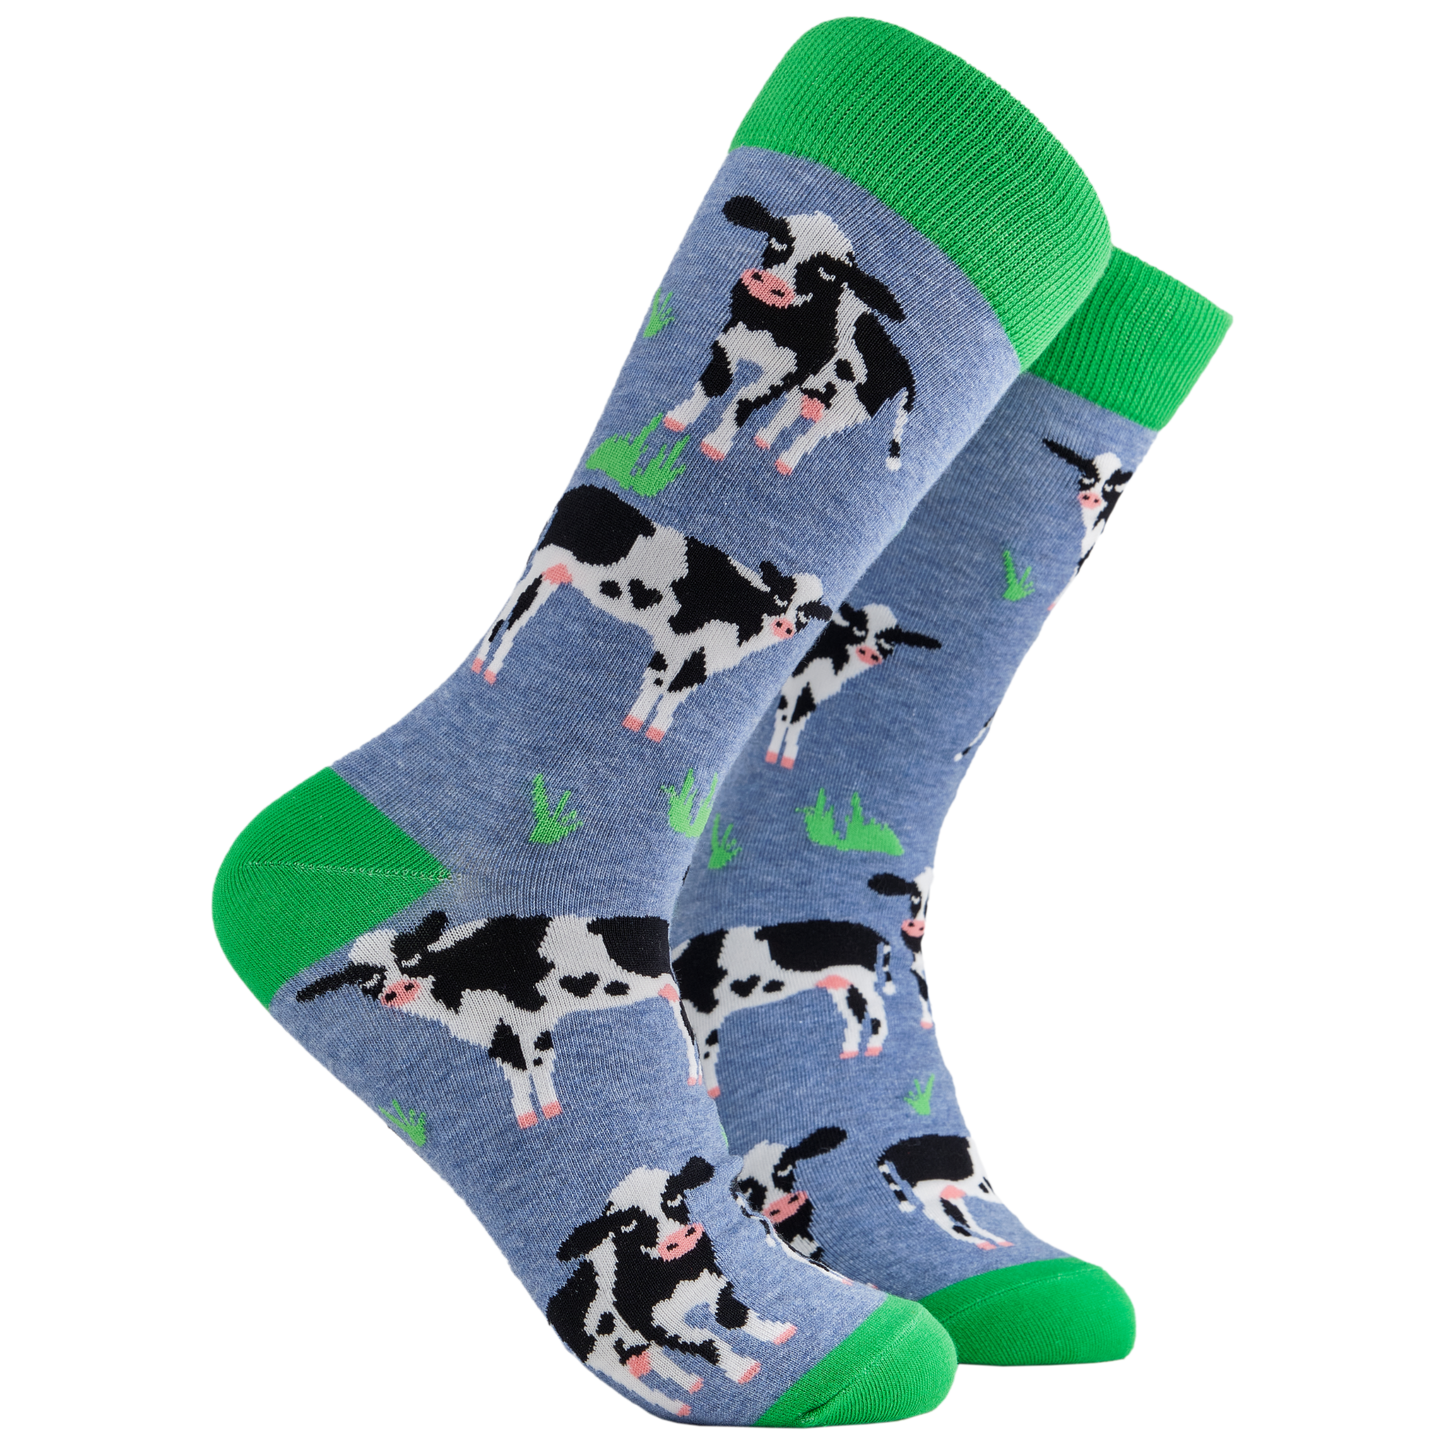 Cow Lover Socks. A pair of socks depicting grass and cows. Blue legs, green cuff, heel and toe.